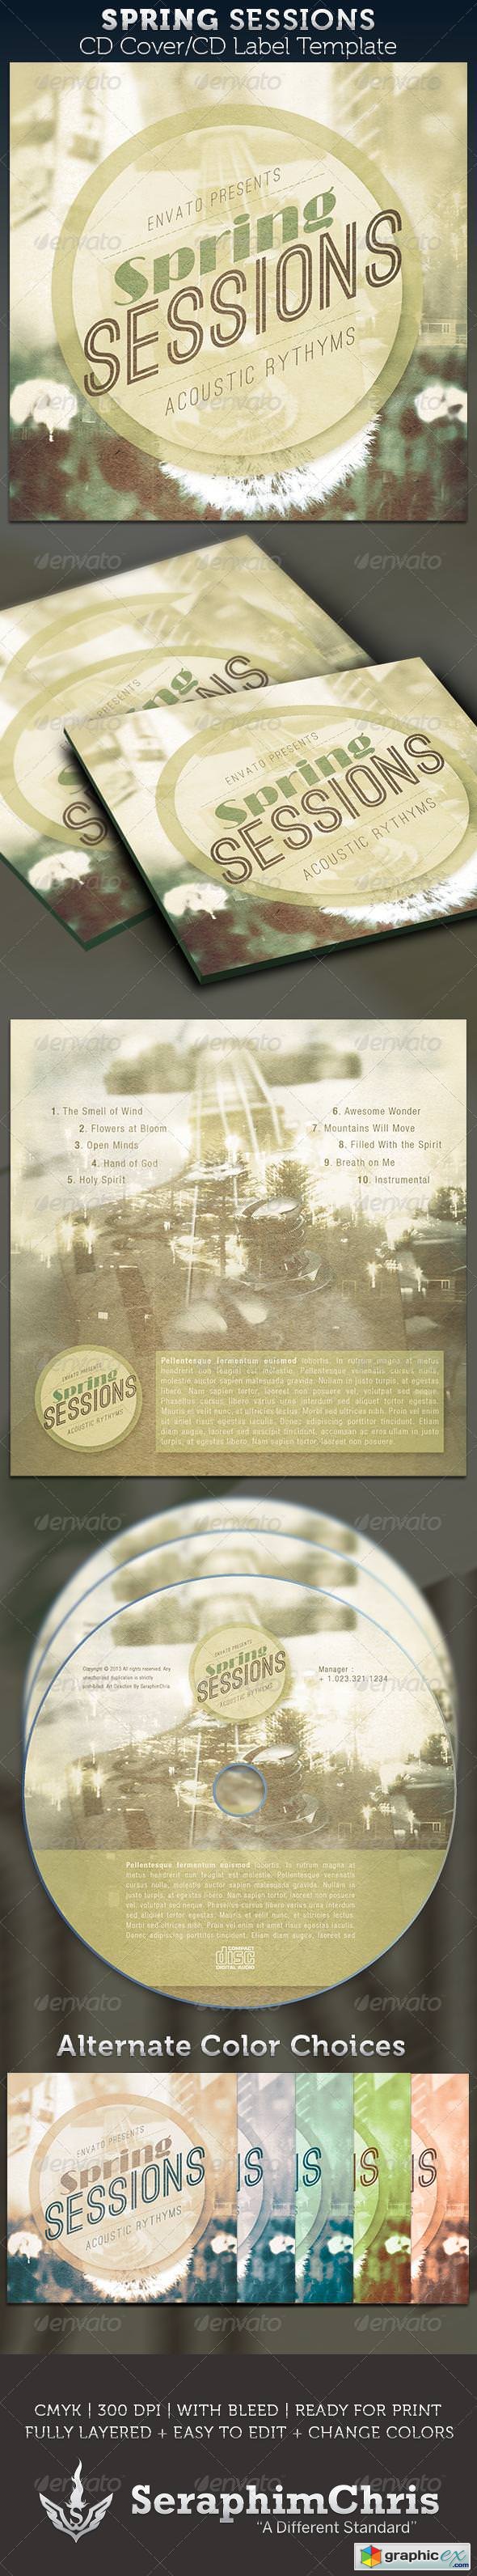 Spring Sessions CD Cover Artwork Template